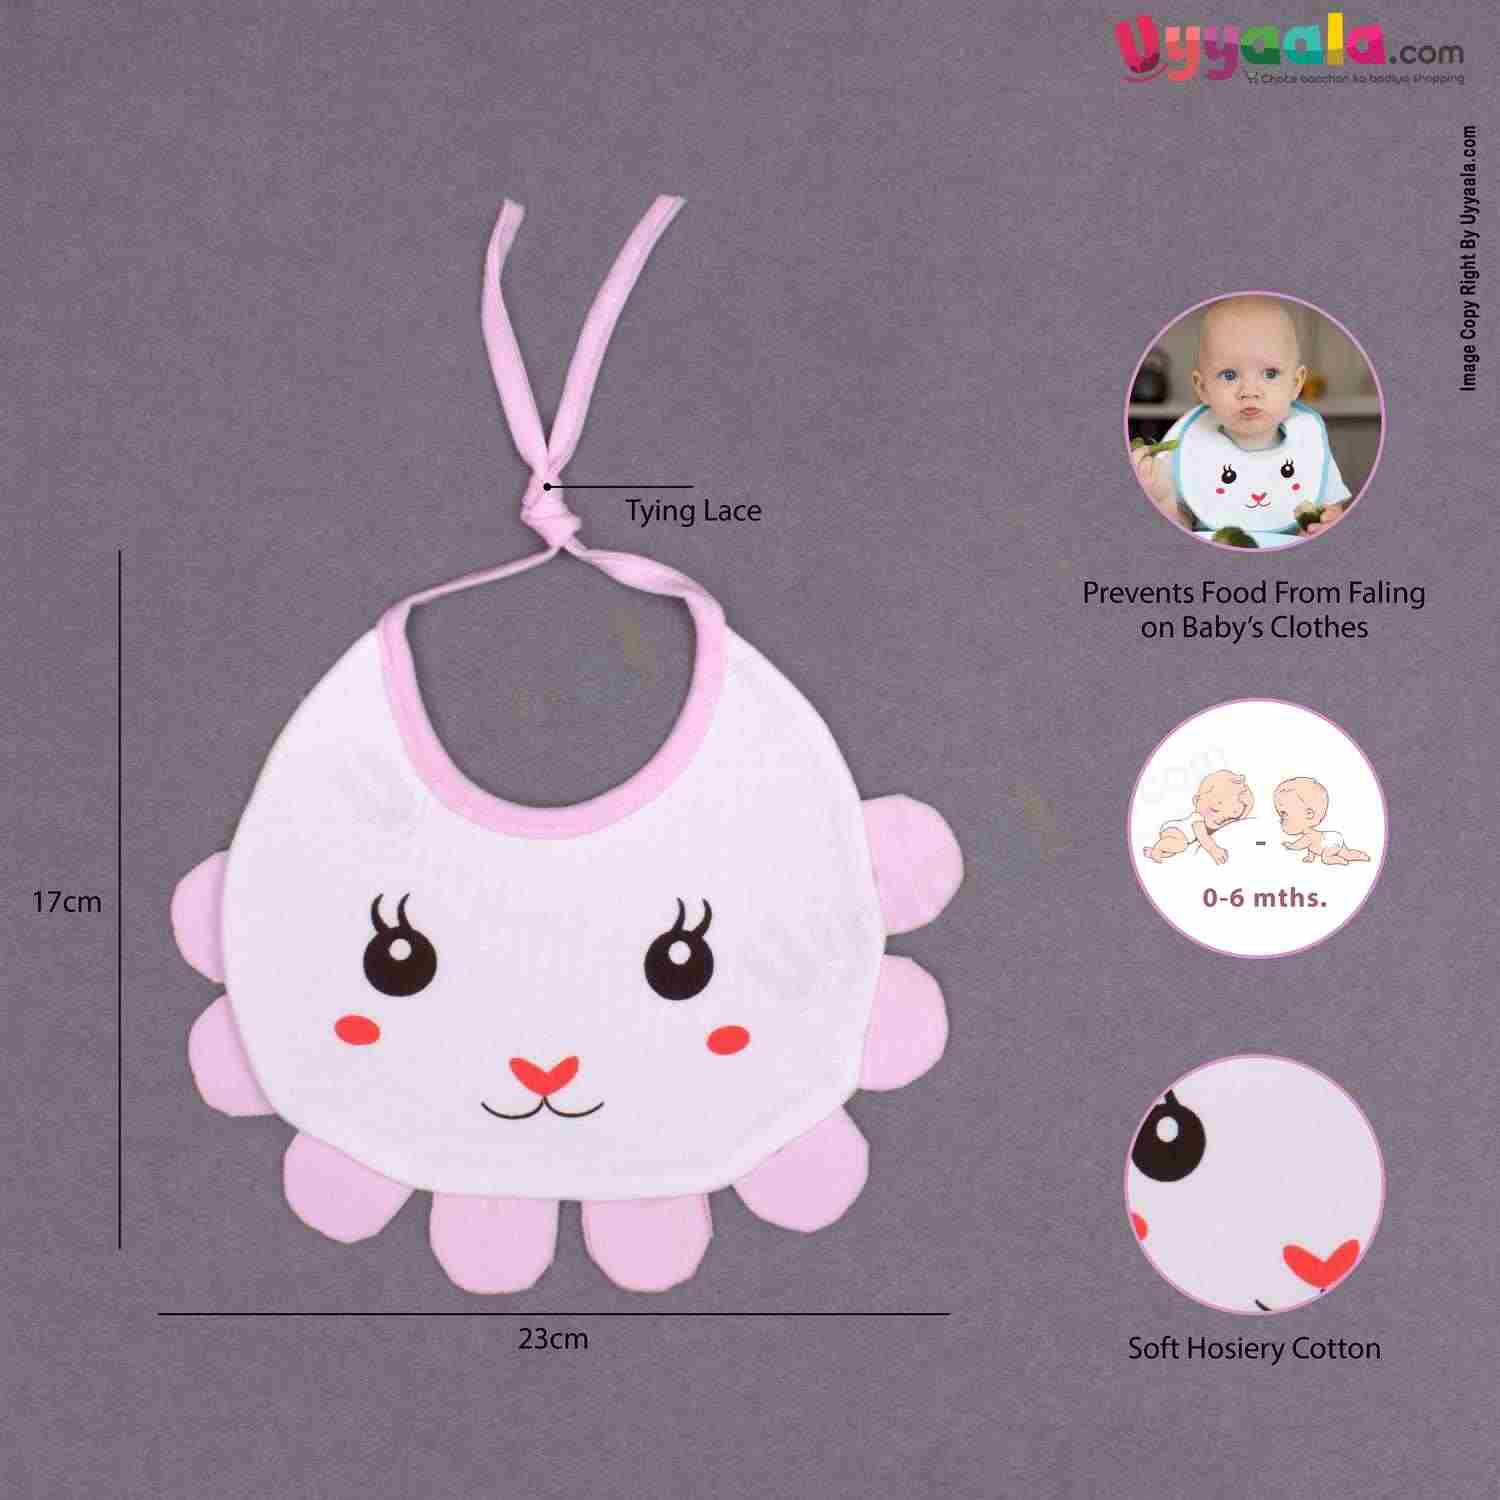 Baby Bib Soft Cotton Hosiery with Cute Kitty Print Pack of 2, Size(17*23cm)-White & Pink